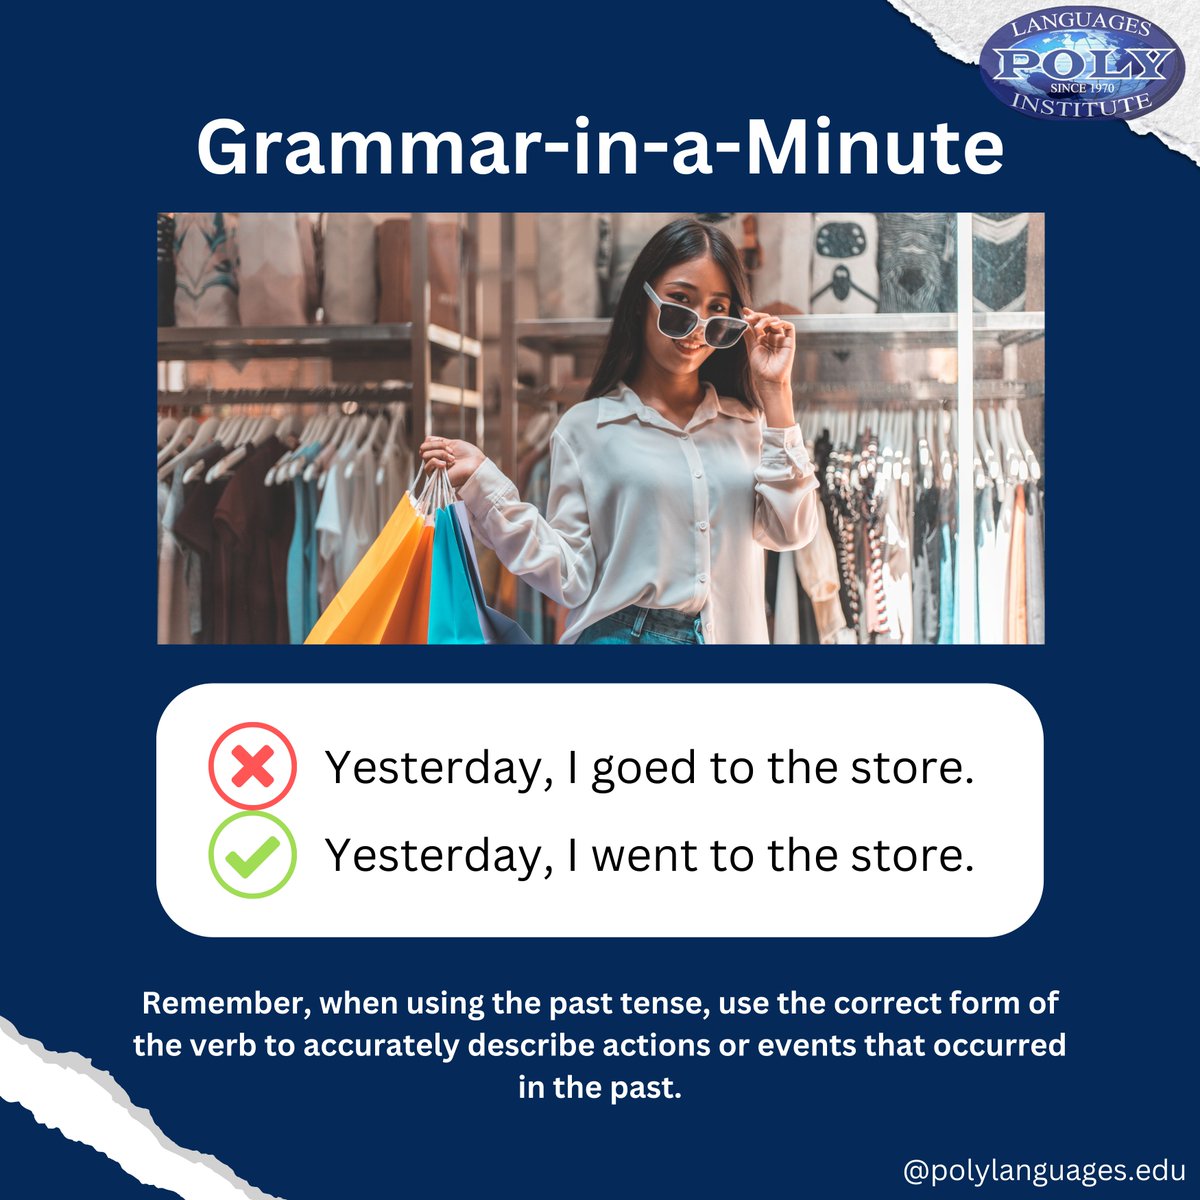 📷 Grammar-in-a-Minute! 📷

Learn essential grammar tips in just a minute! 📷📷

#grammarinaminute #languagelearning #quicktips #englishteacher #englishlearning #grammar #pasttense #learn #learnenglish #learning